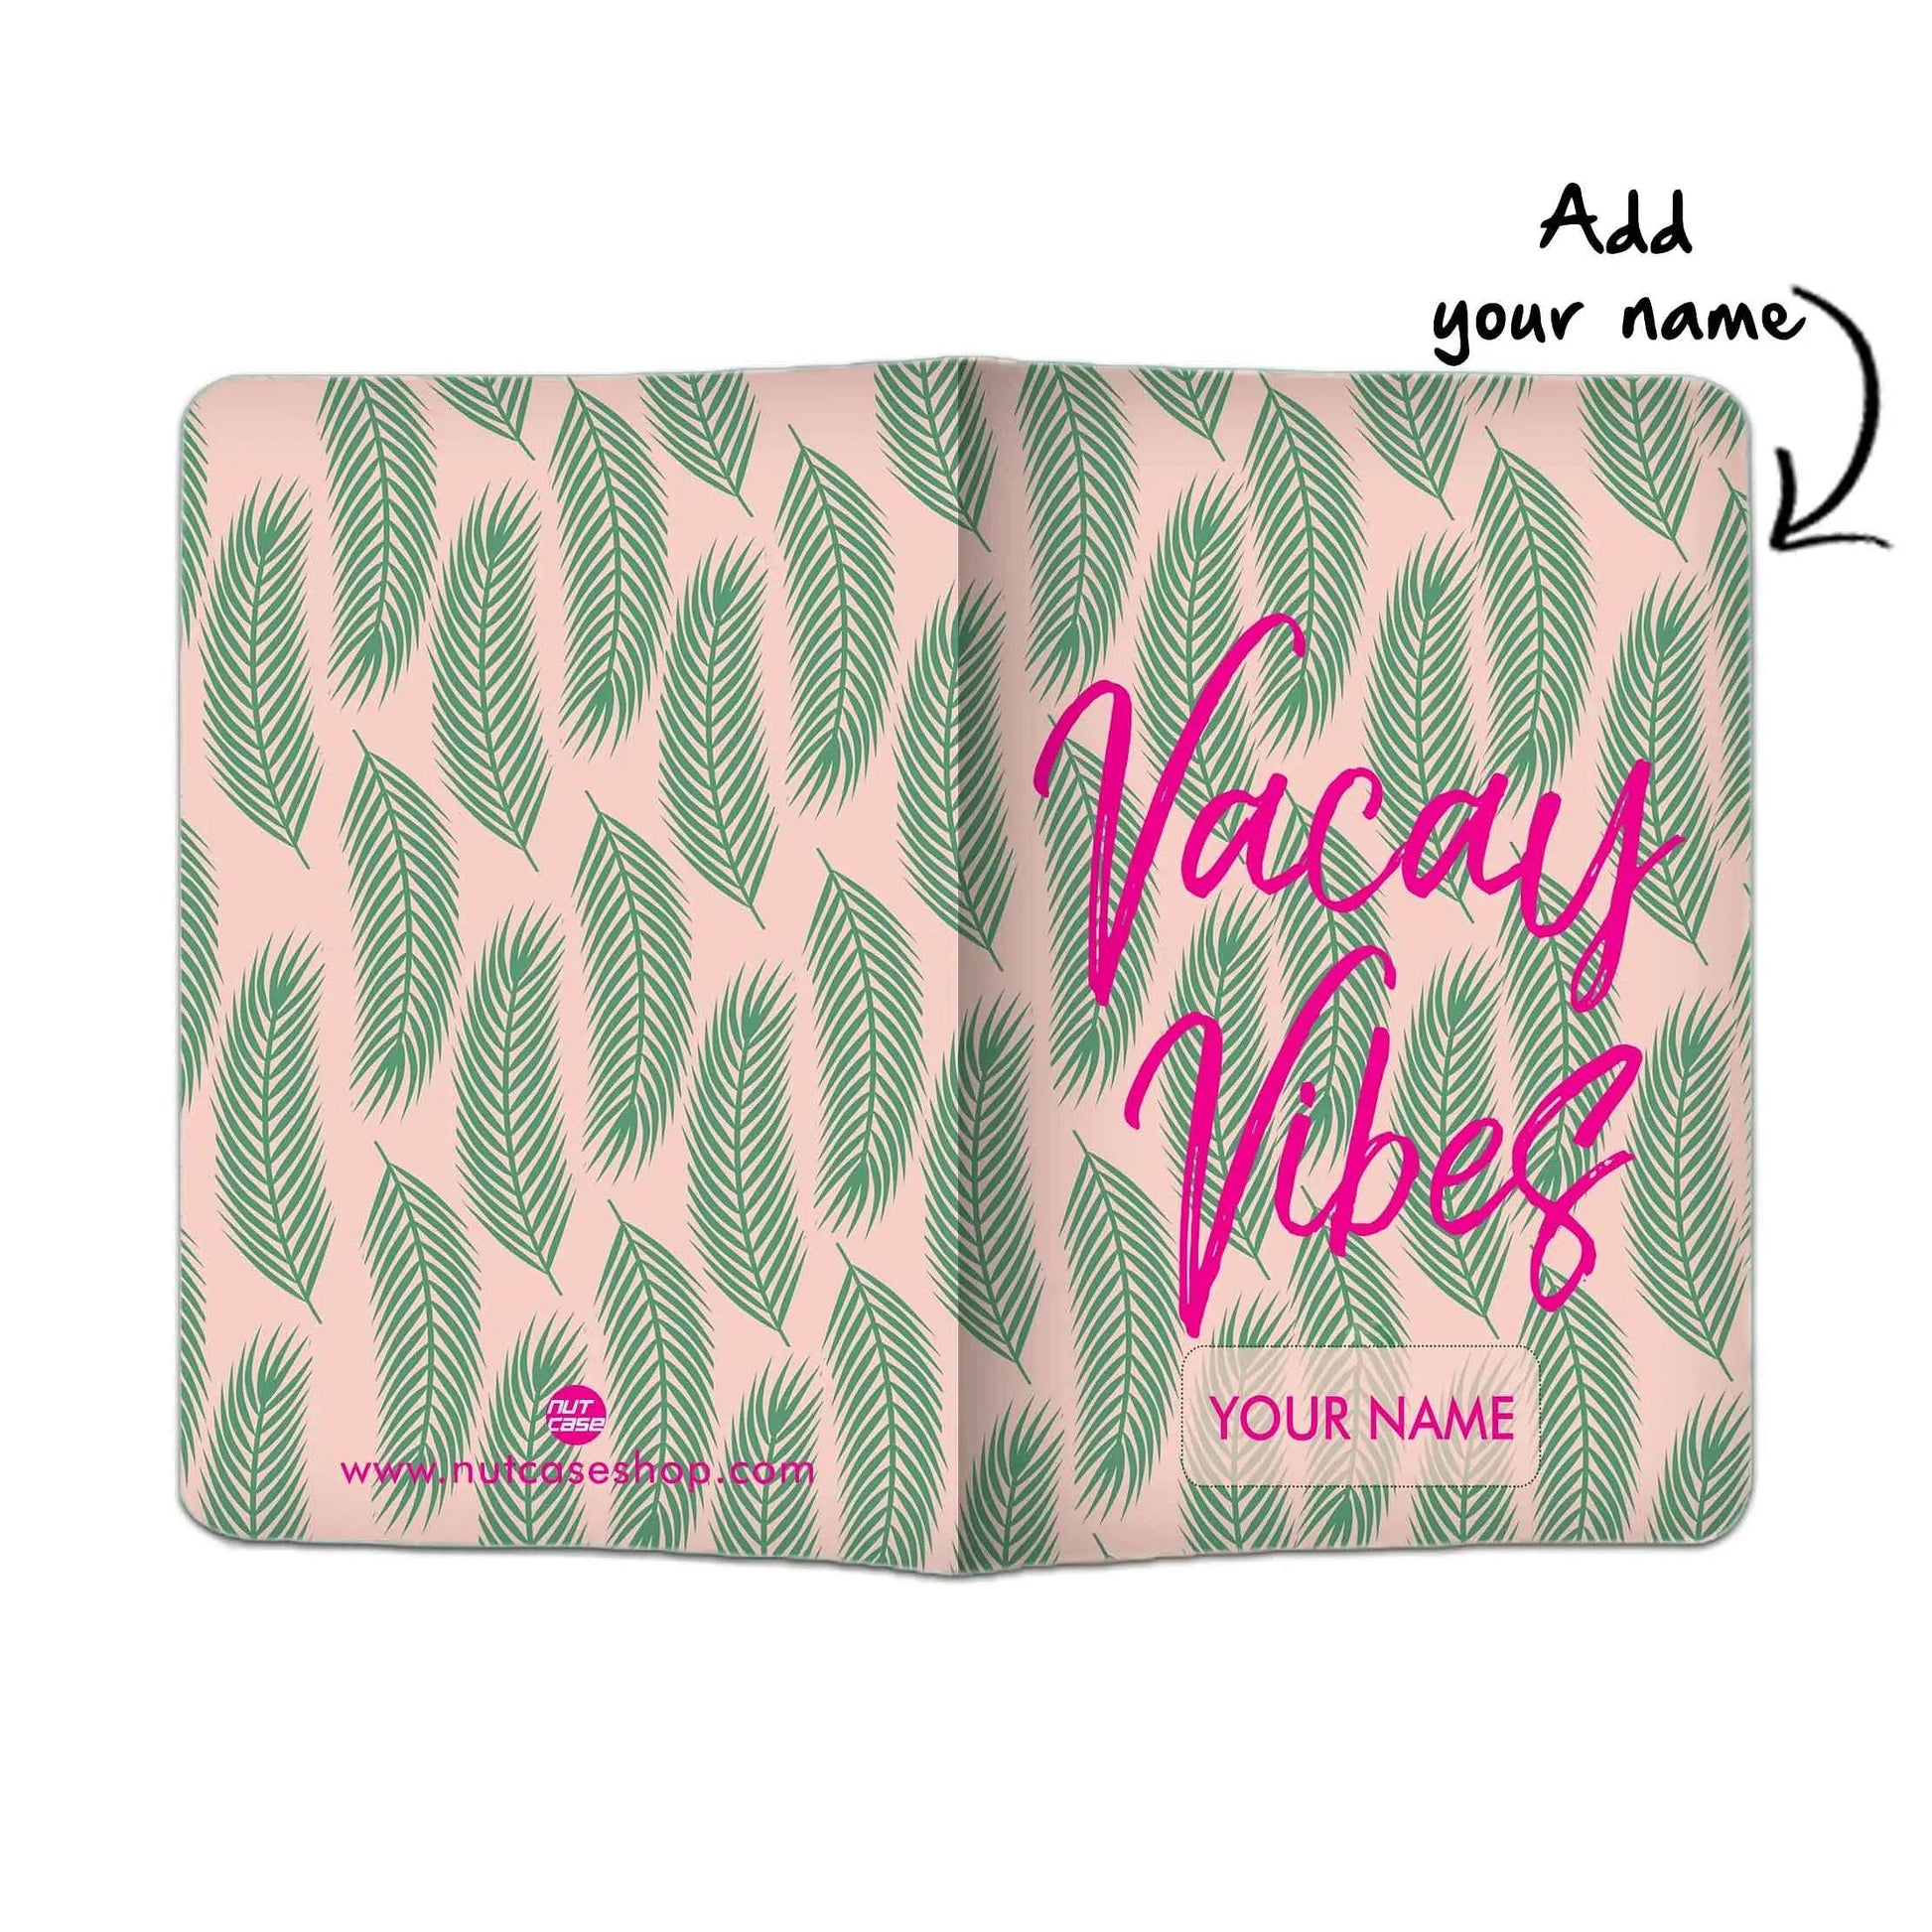 Classy Customized Passport Holder - Vacay Vibes With Leaves - Nutcase